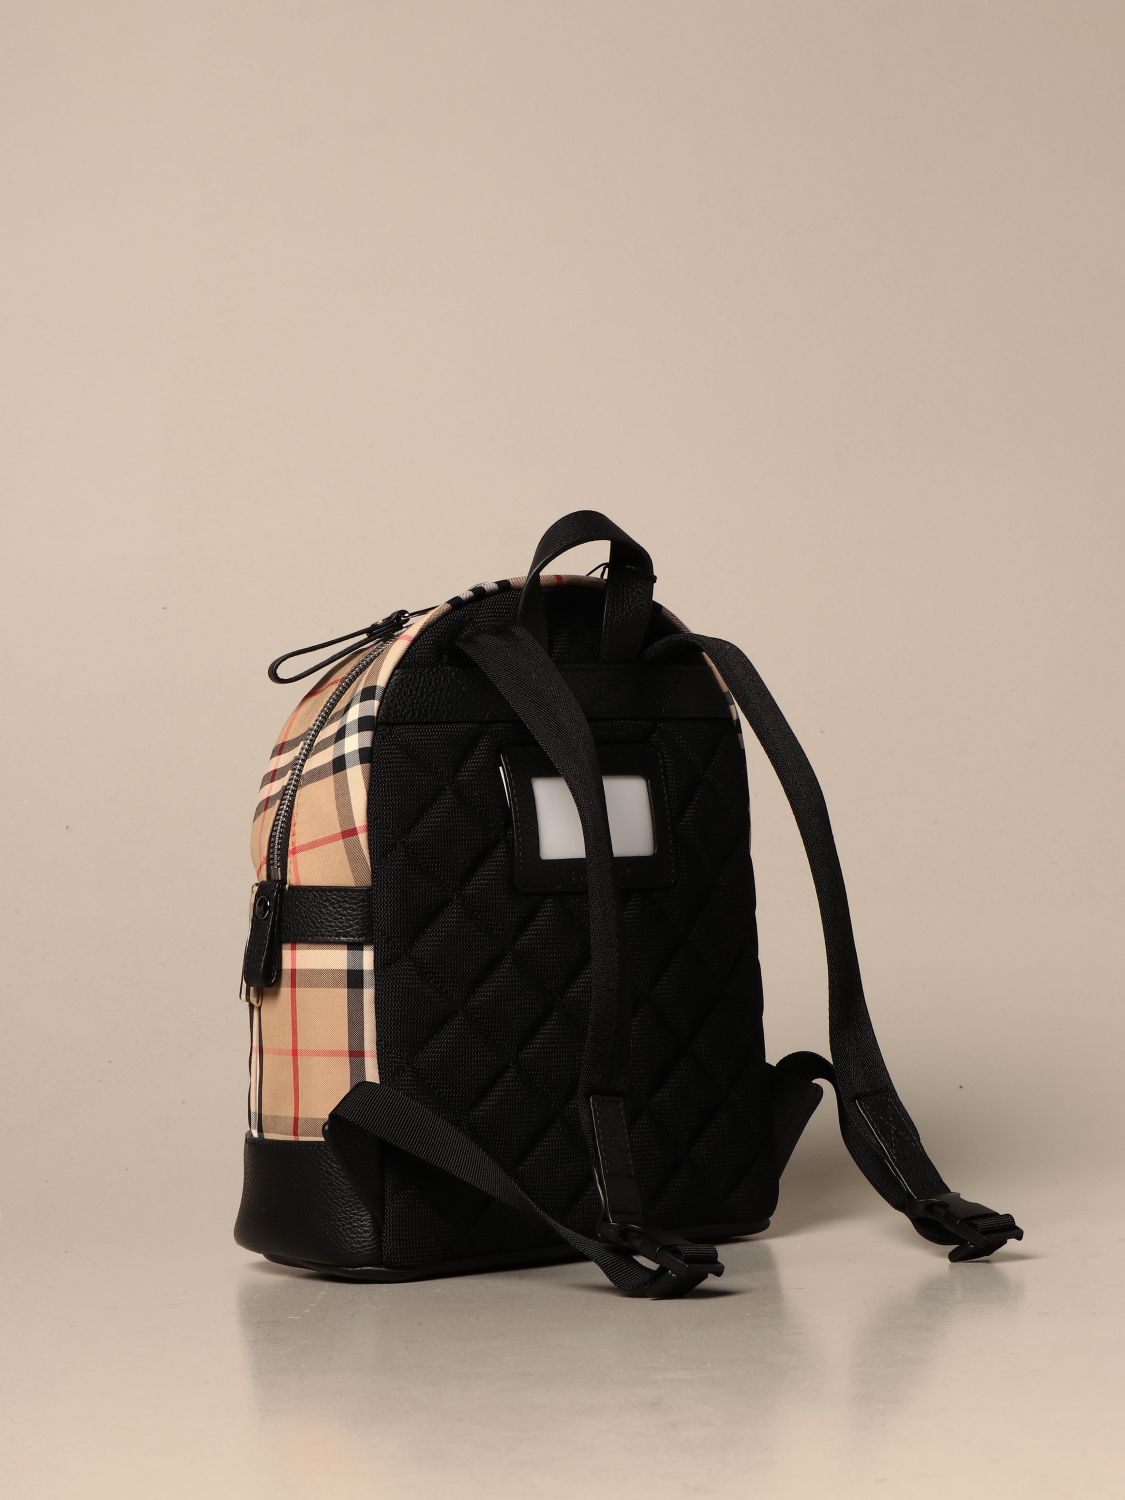 Burberry Backpack In Vintage Check Cotton Bag Burberry Kids Beige Bag Burberry Giglio En